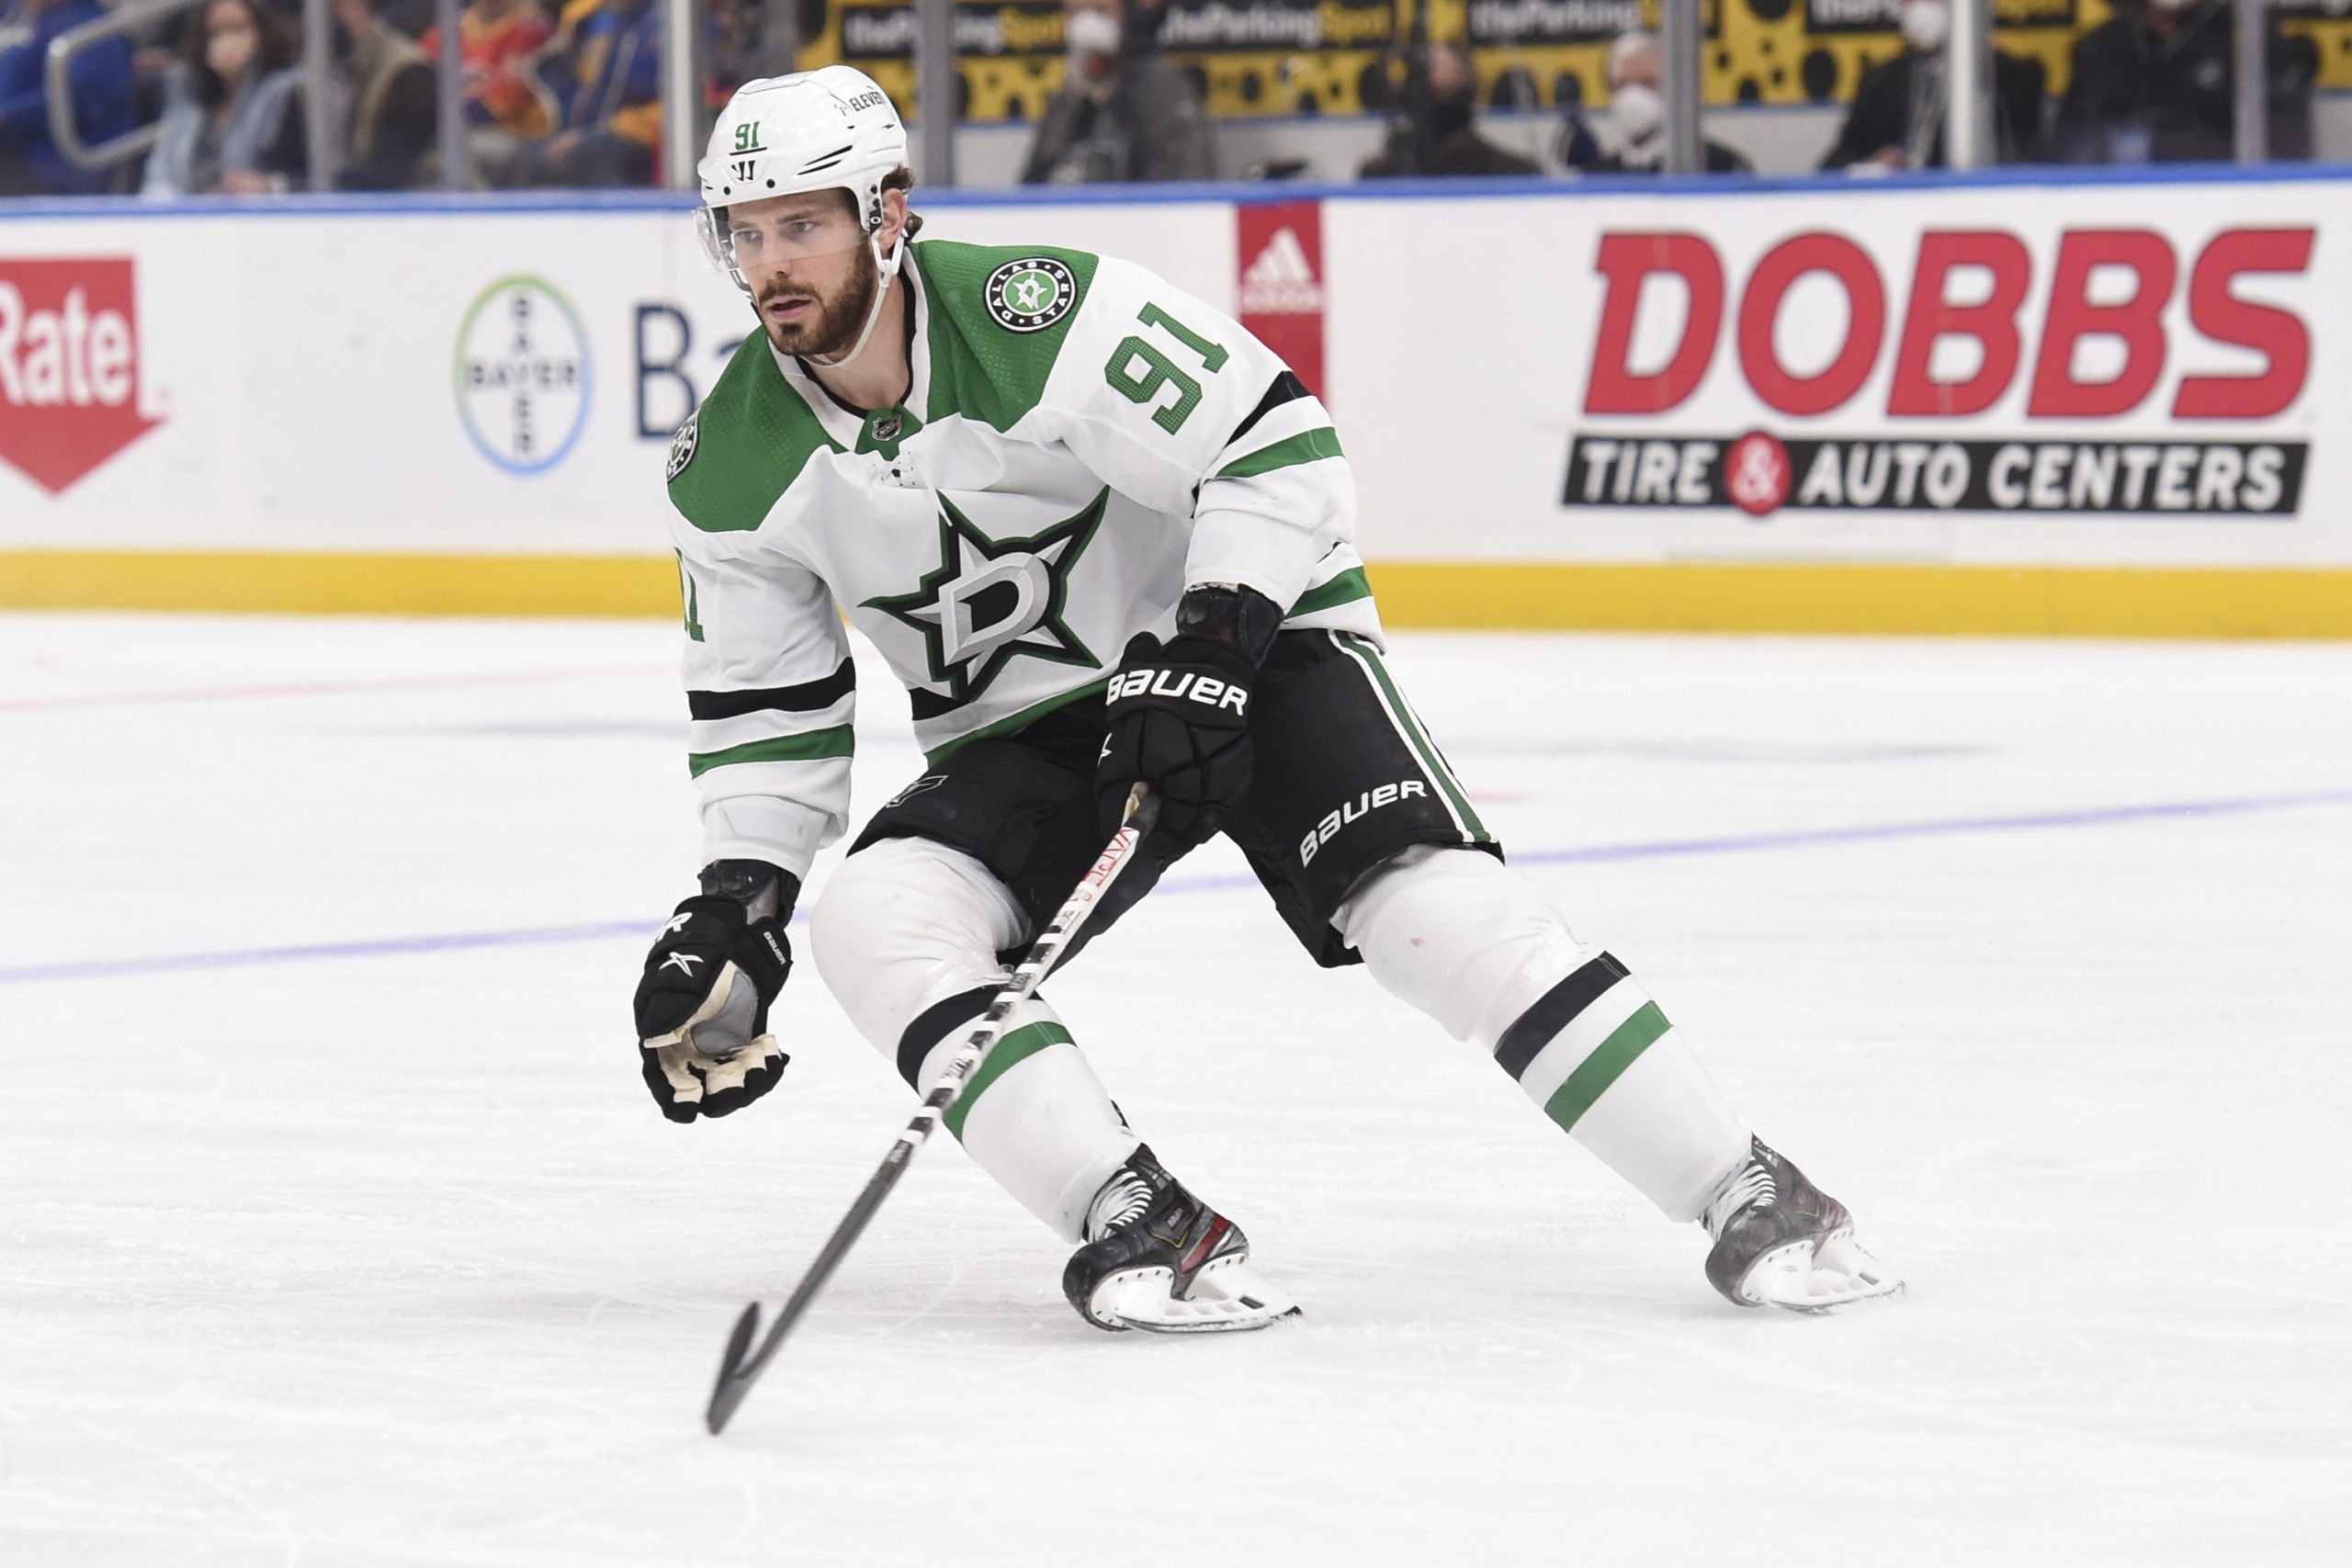 Dallas Stars center Tyler Seguin (91) skates against the St. Louis Blues during the third period of an NHL hockey game Sunday, Jan. 9, 2022, in St. Louis